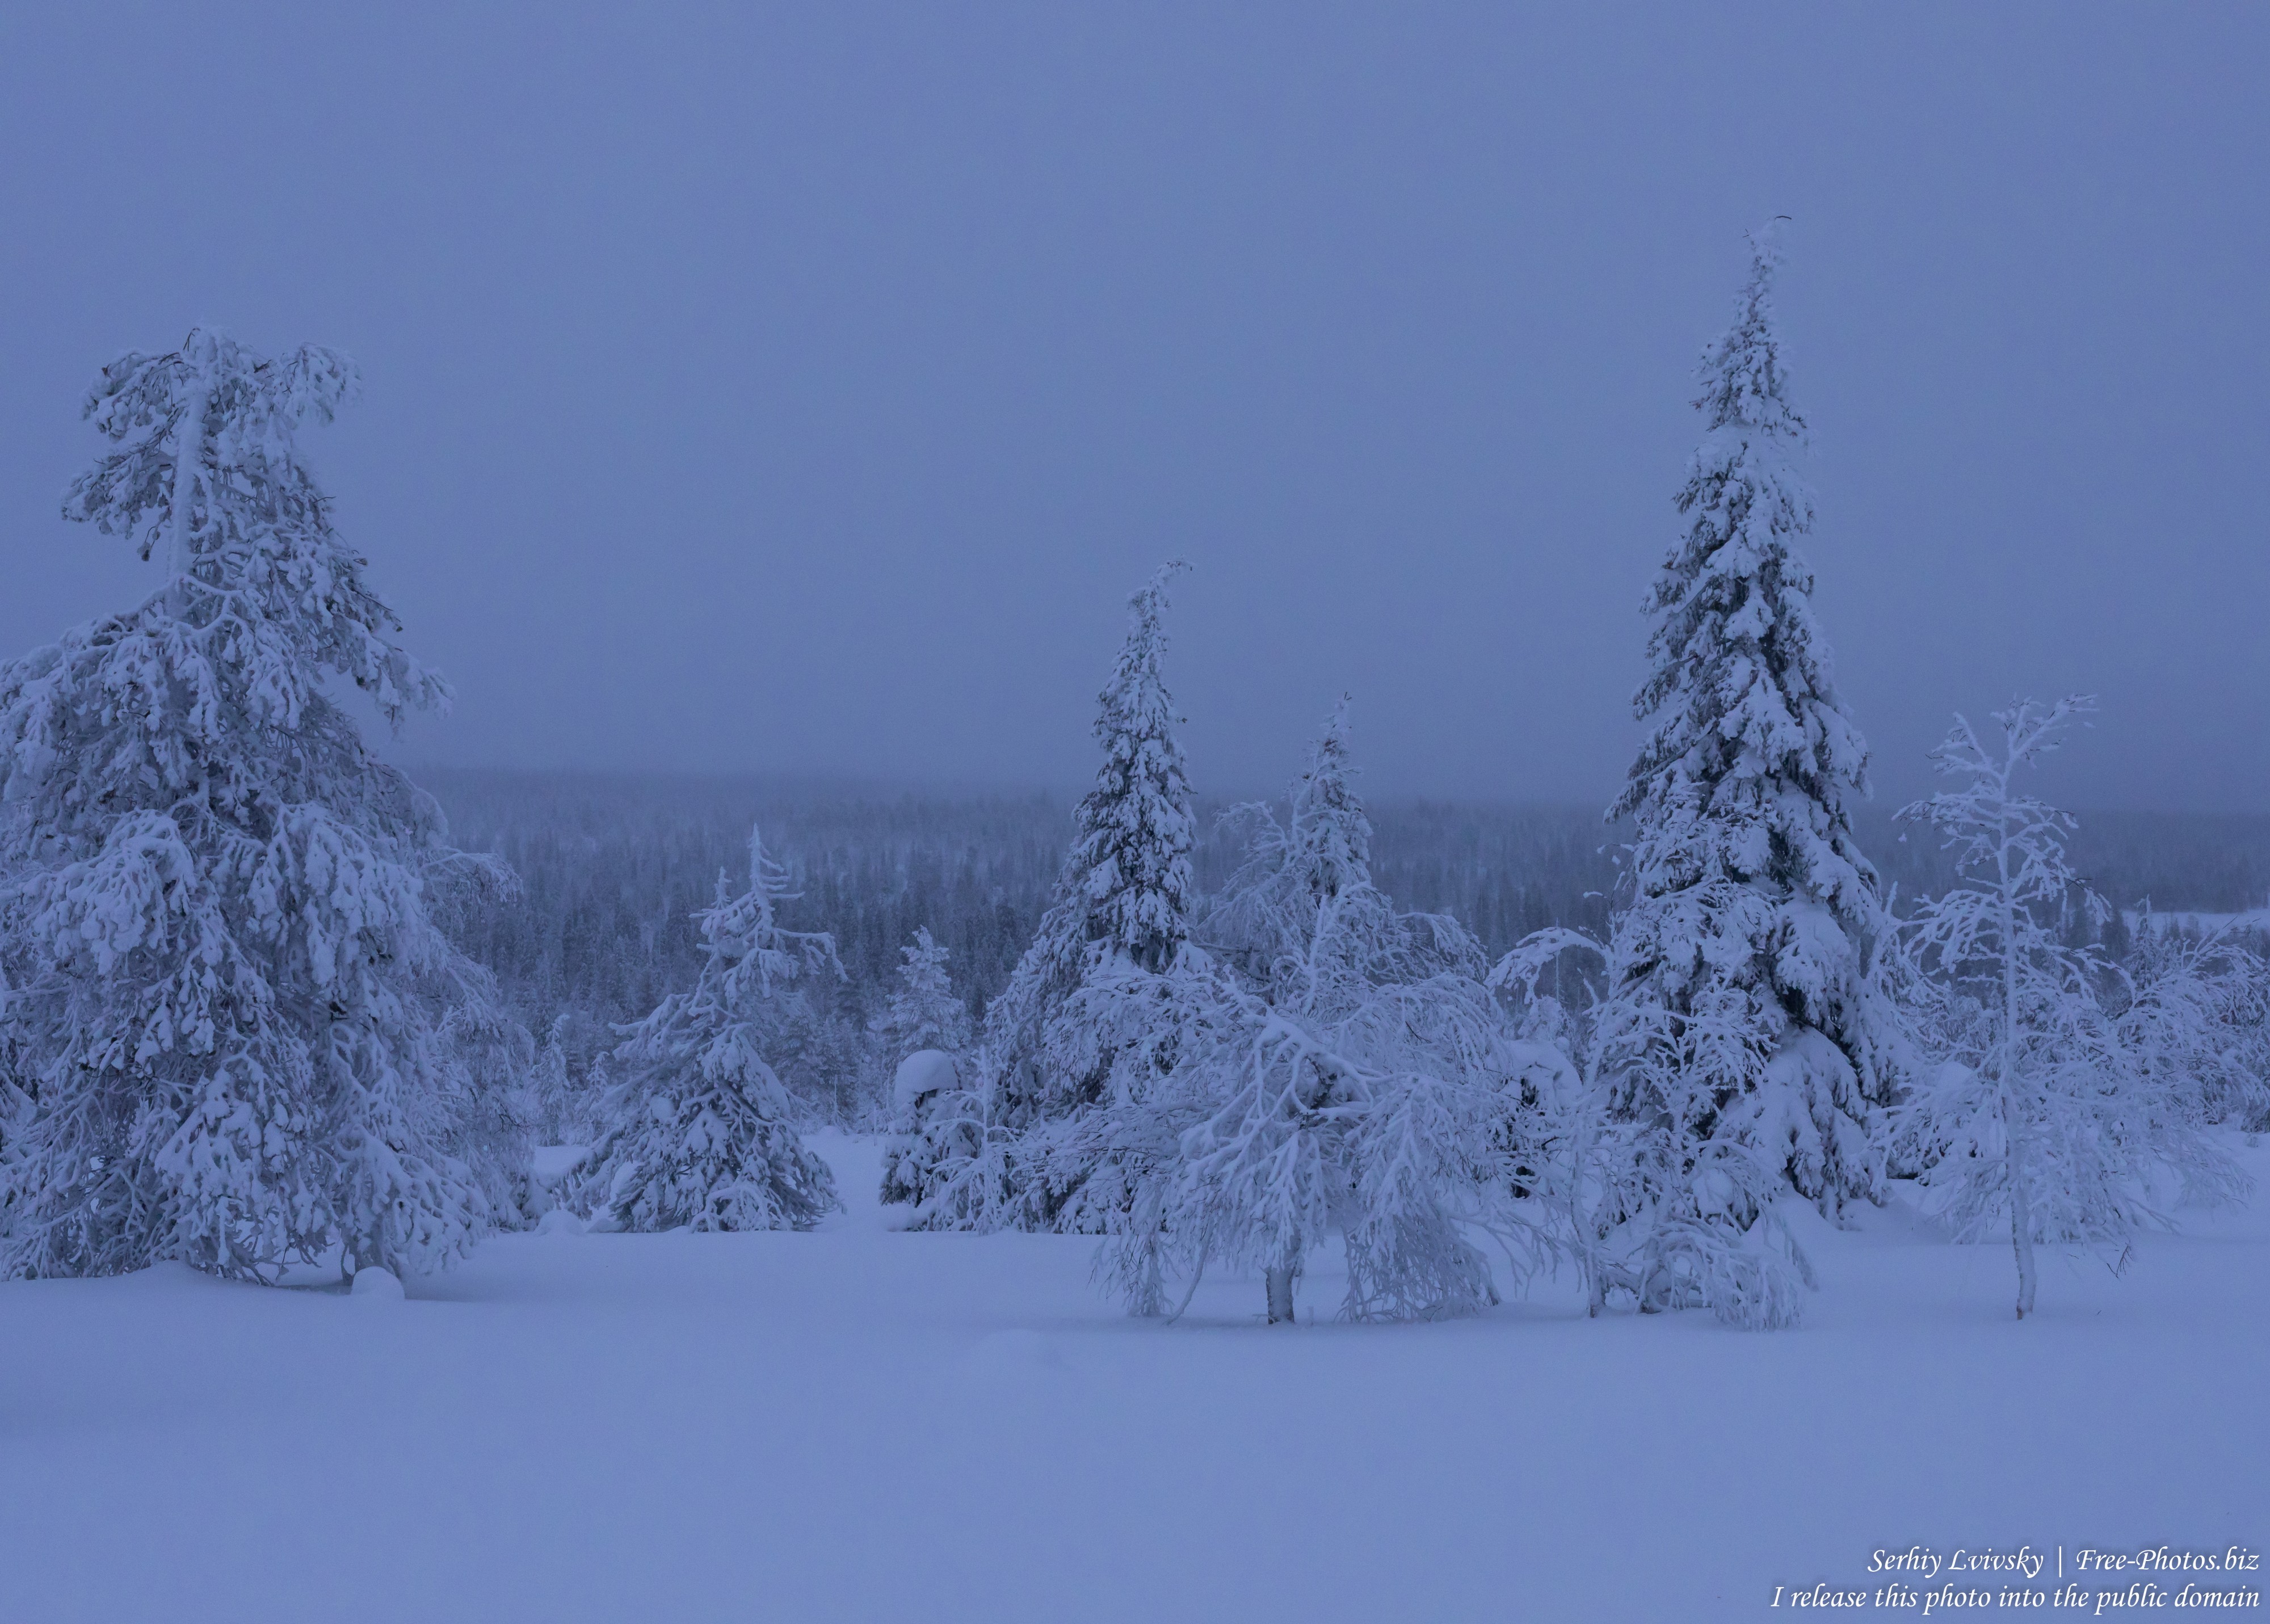 Riisitunturi, Finland, photographed in January 2020 by Serhiy Lvivsky, picture 22